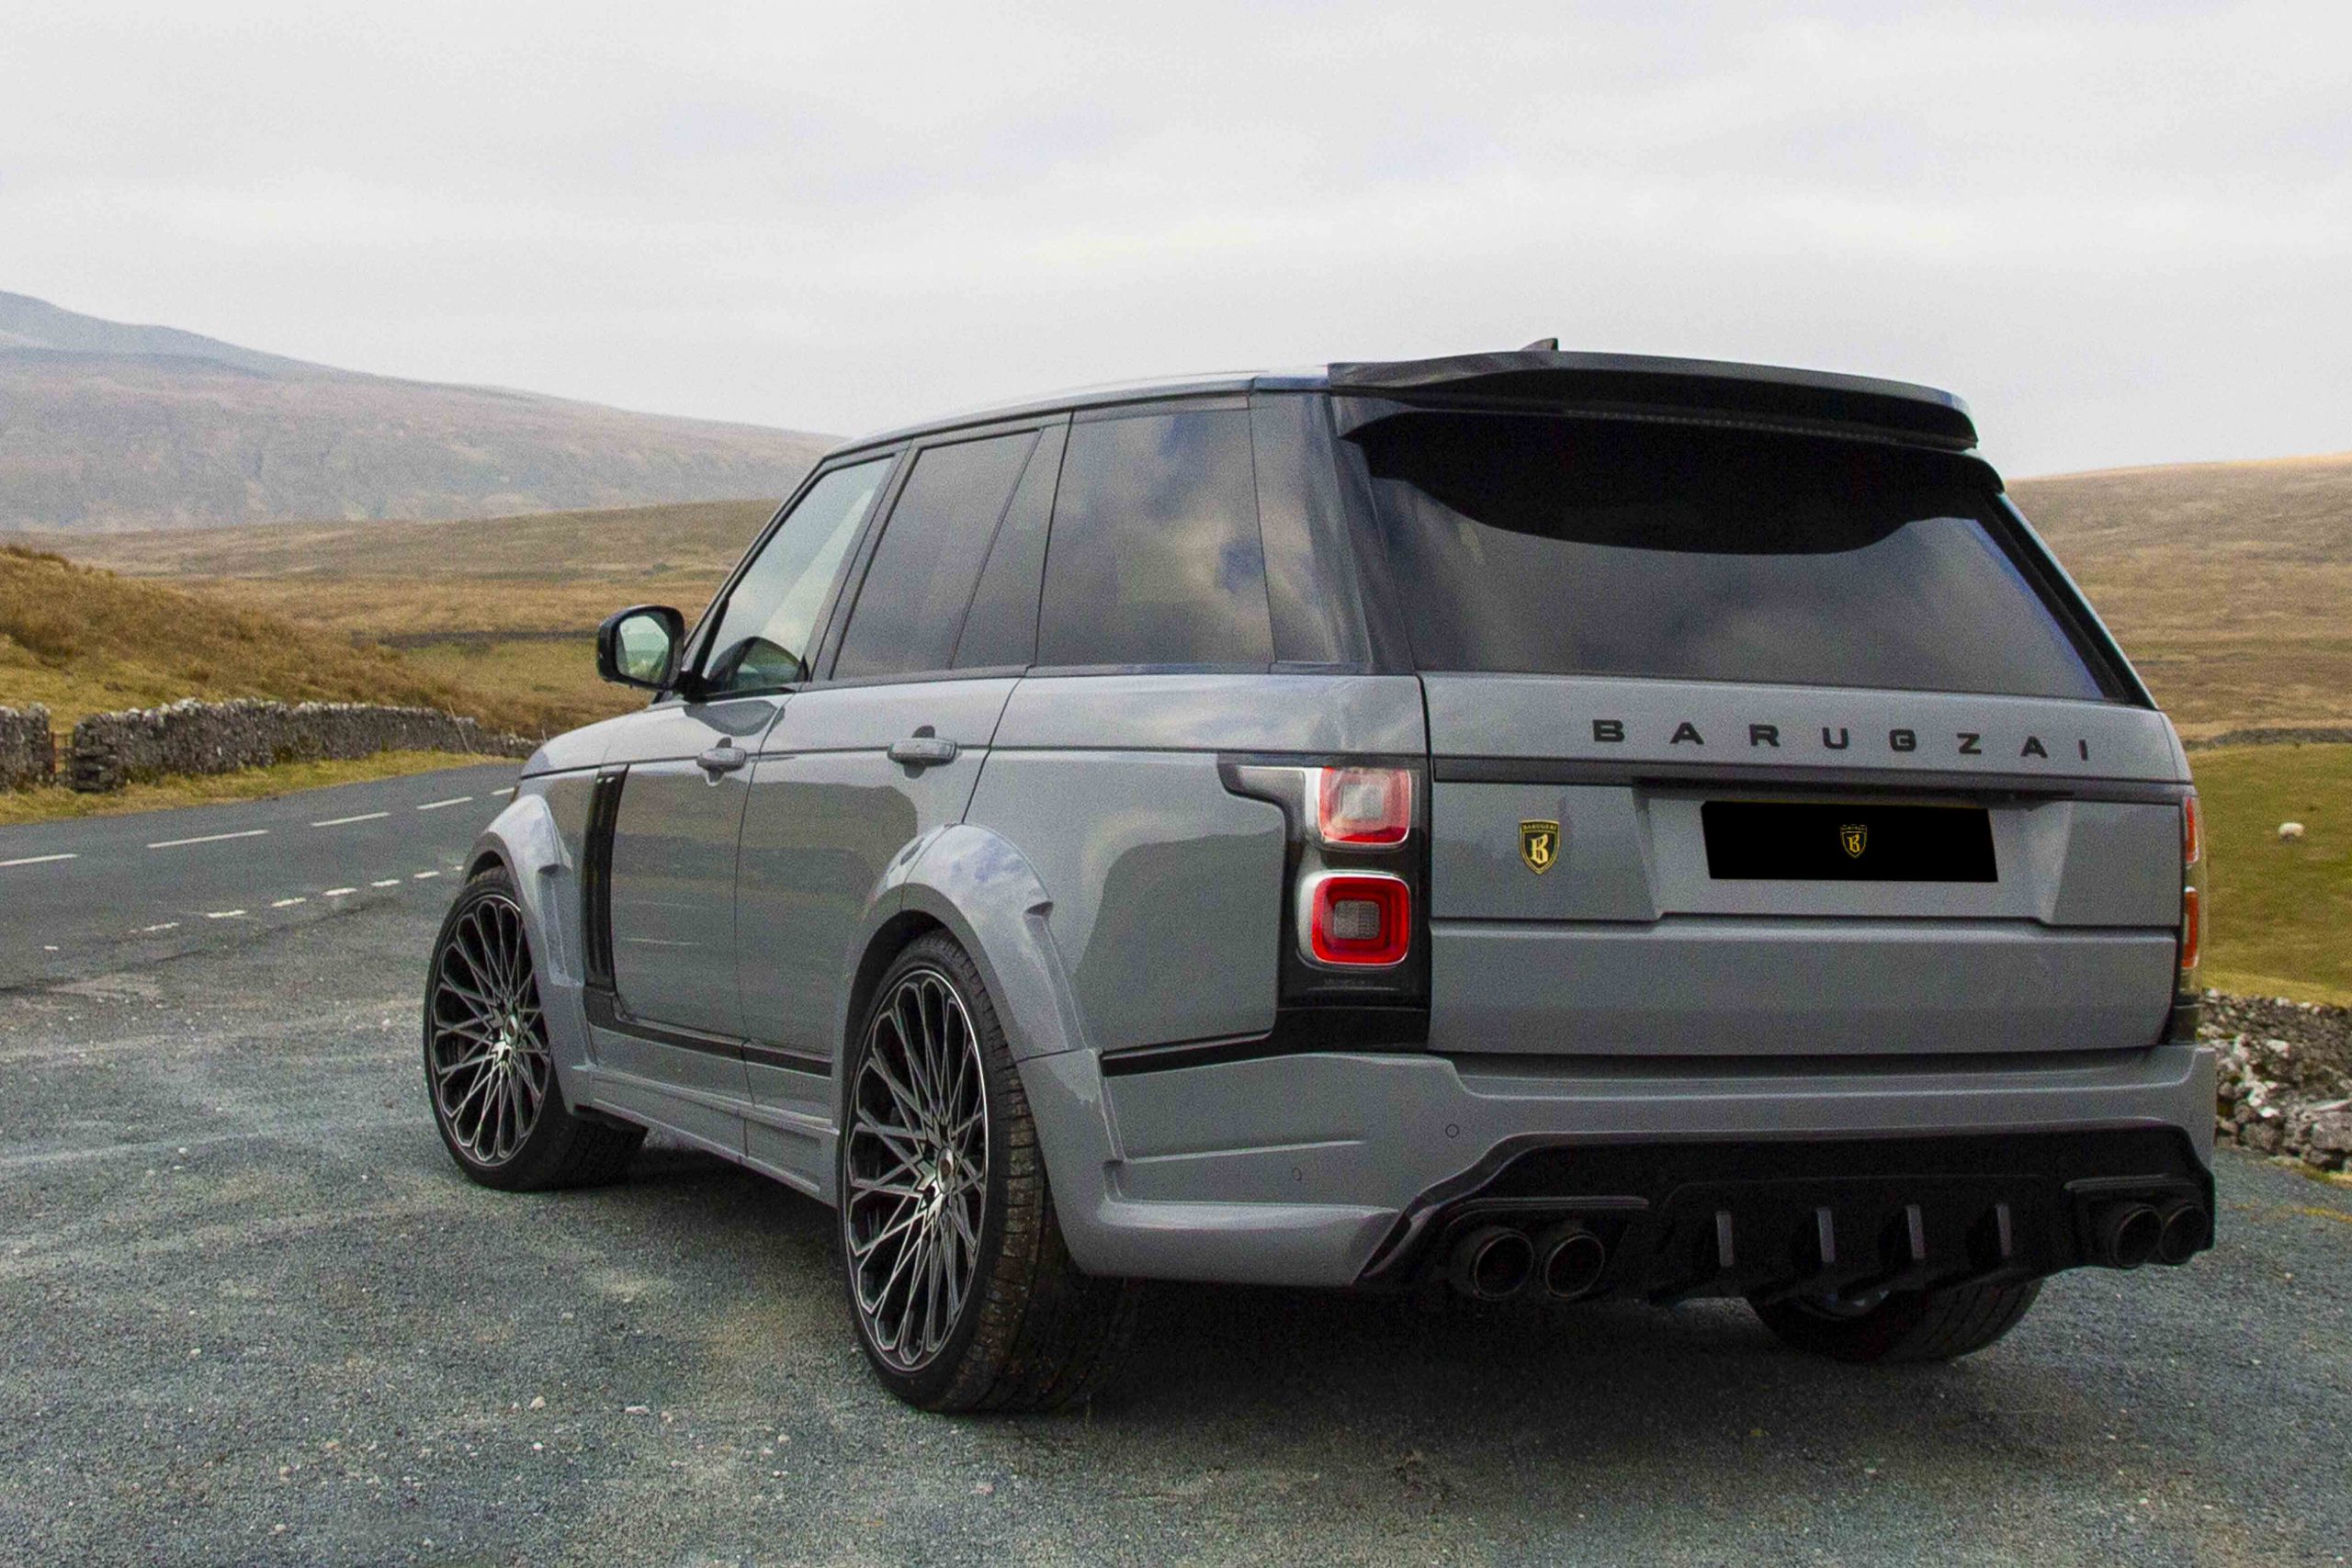 Check our price and buy Barugzai Bison Wide Edition body kit for Land Rover Range Rover Vogue (2019+)